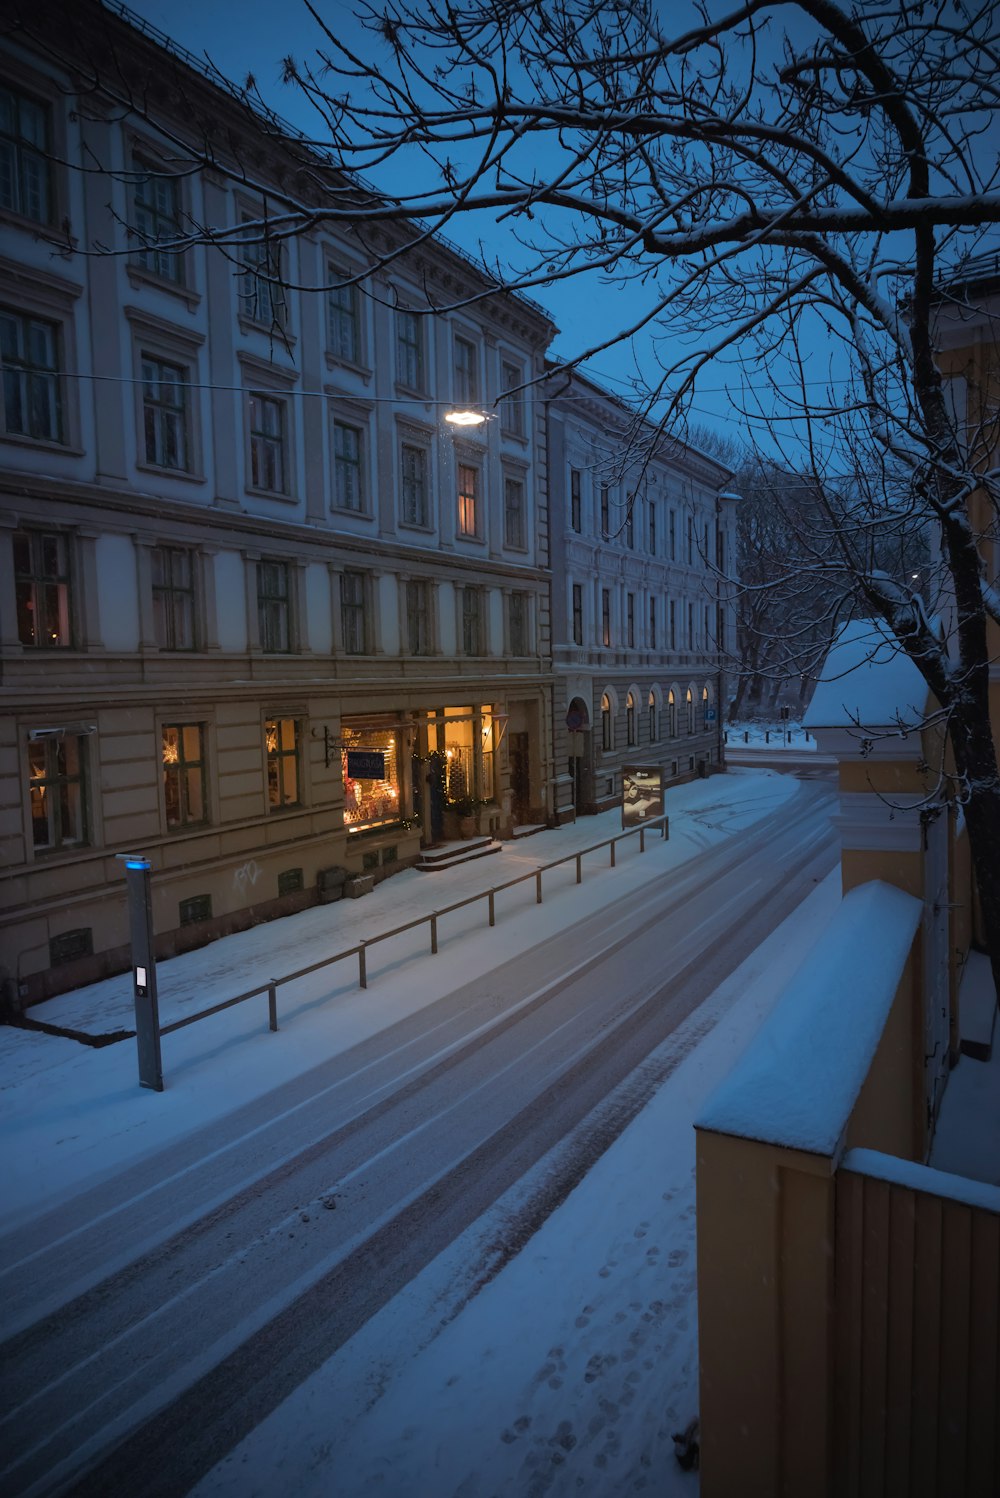 a city street is covered in snow at night